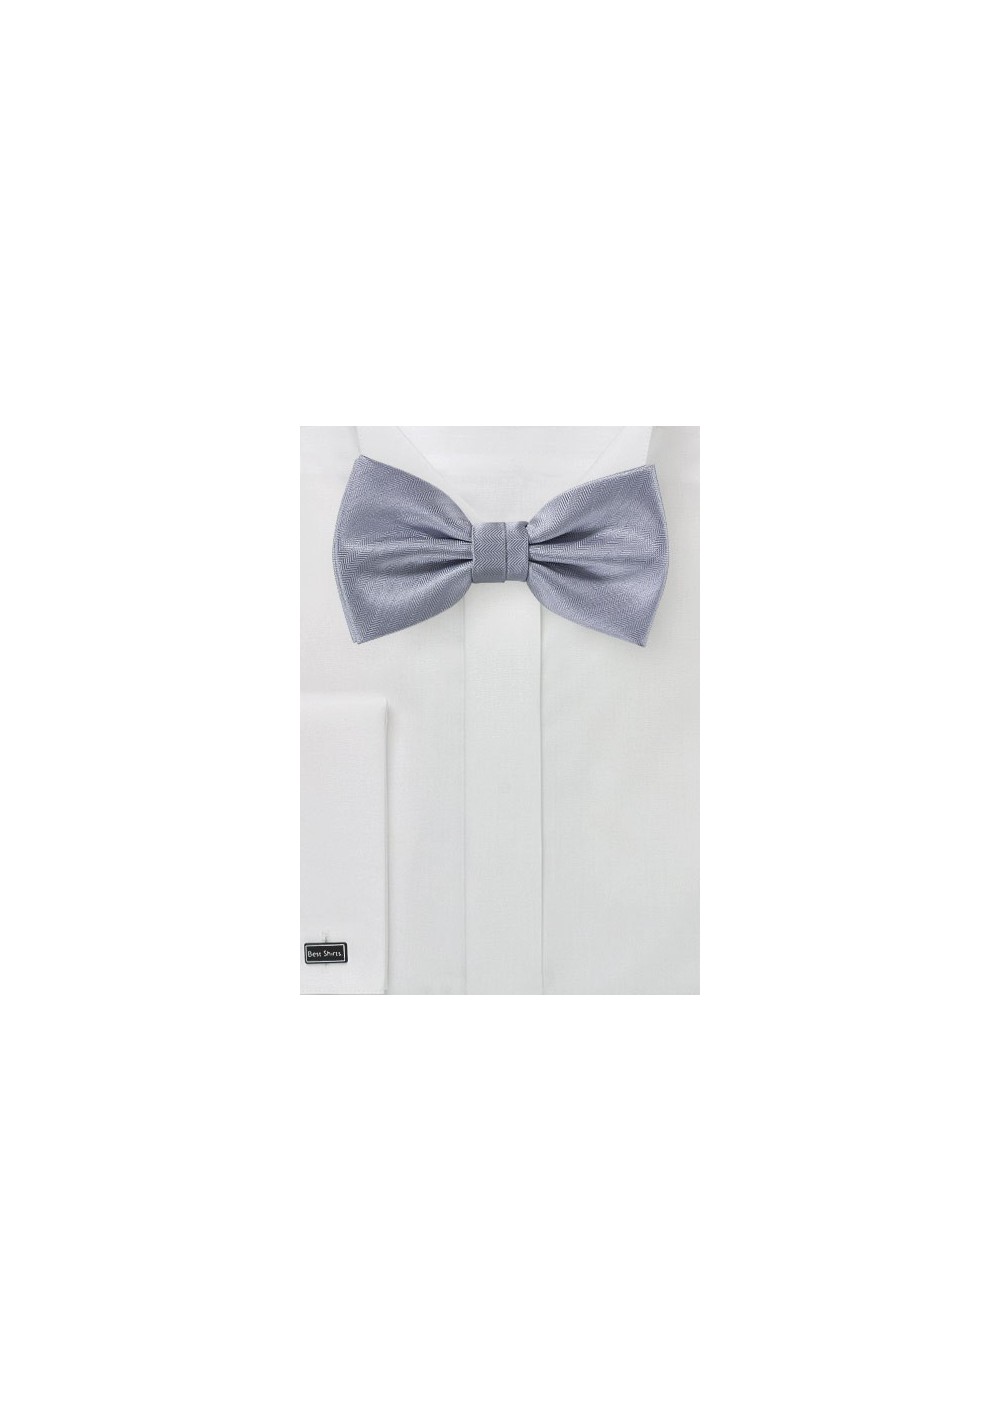 Men's Bow Tie in Silver with Matte Texture